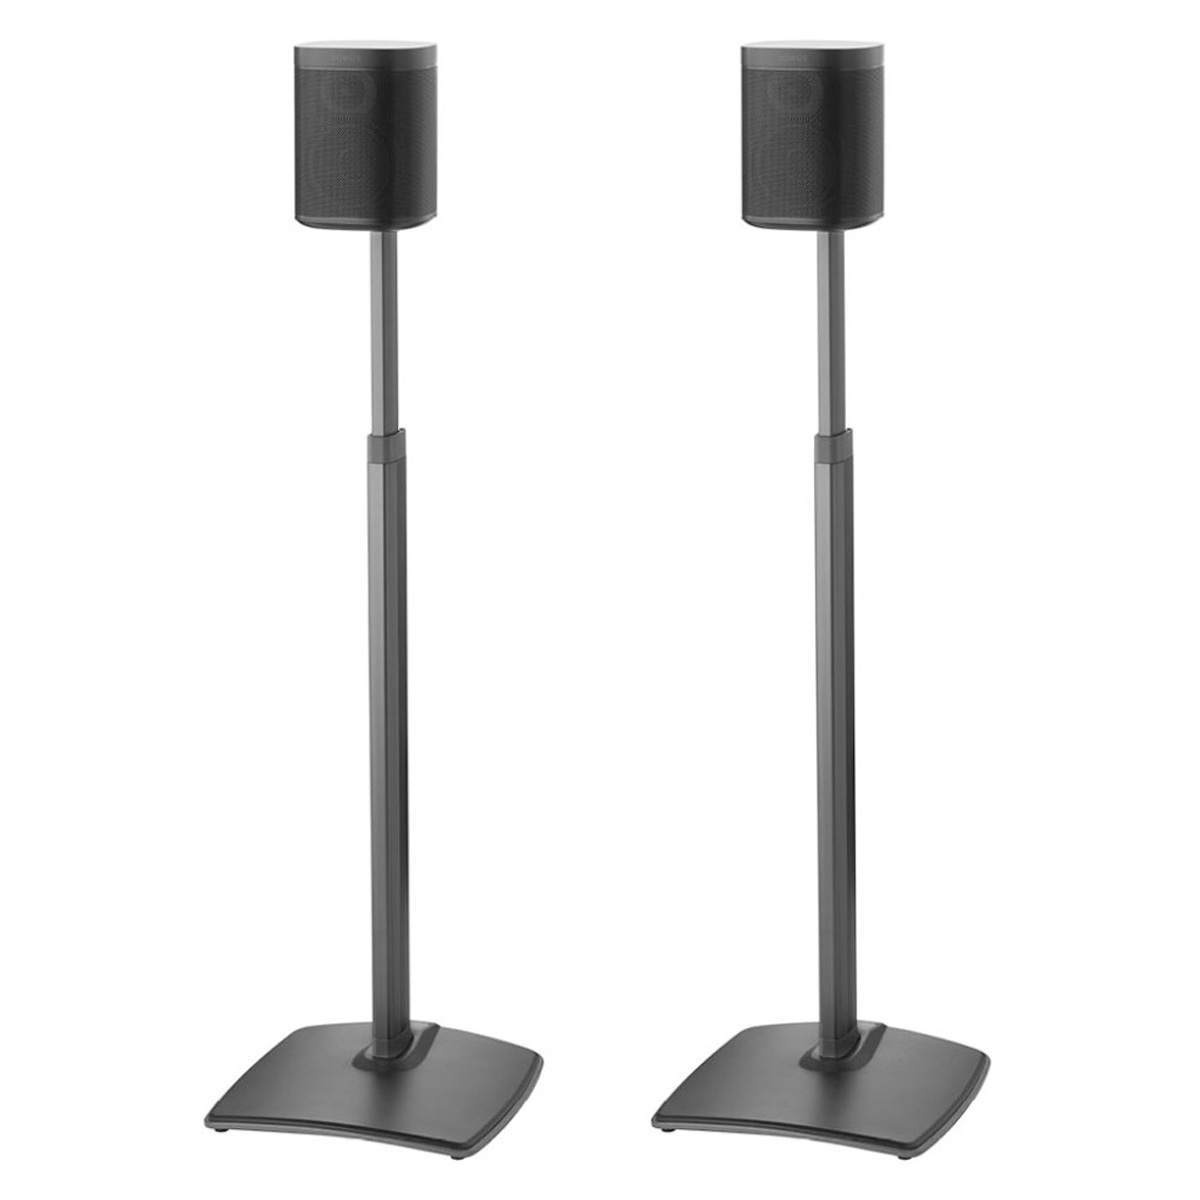 Sanus WSSA2 Adjustable Height Wireless Speaker Stands for Sonos ONE, PLAY:1, and PLAY:3 - Pair (Black) - image 1 of 4